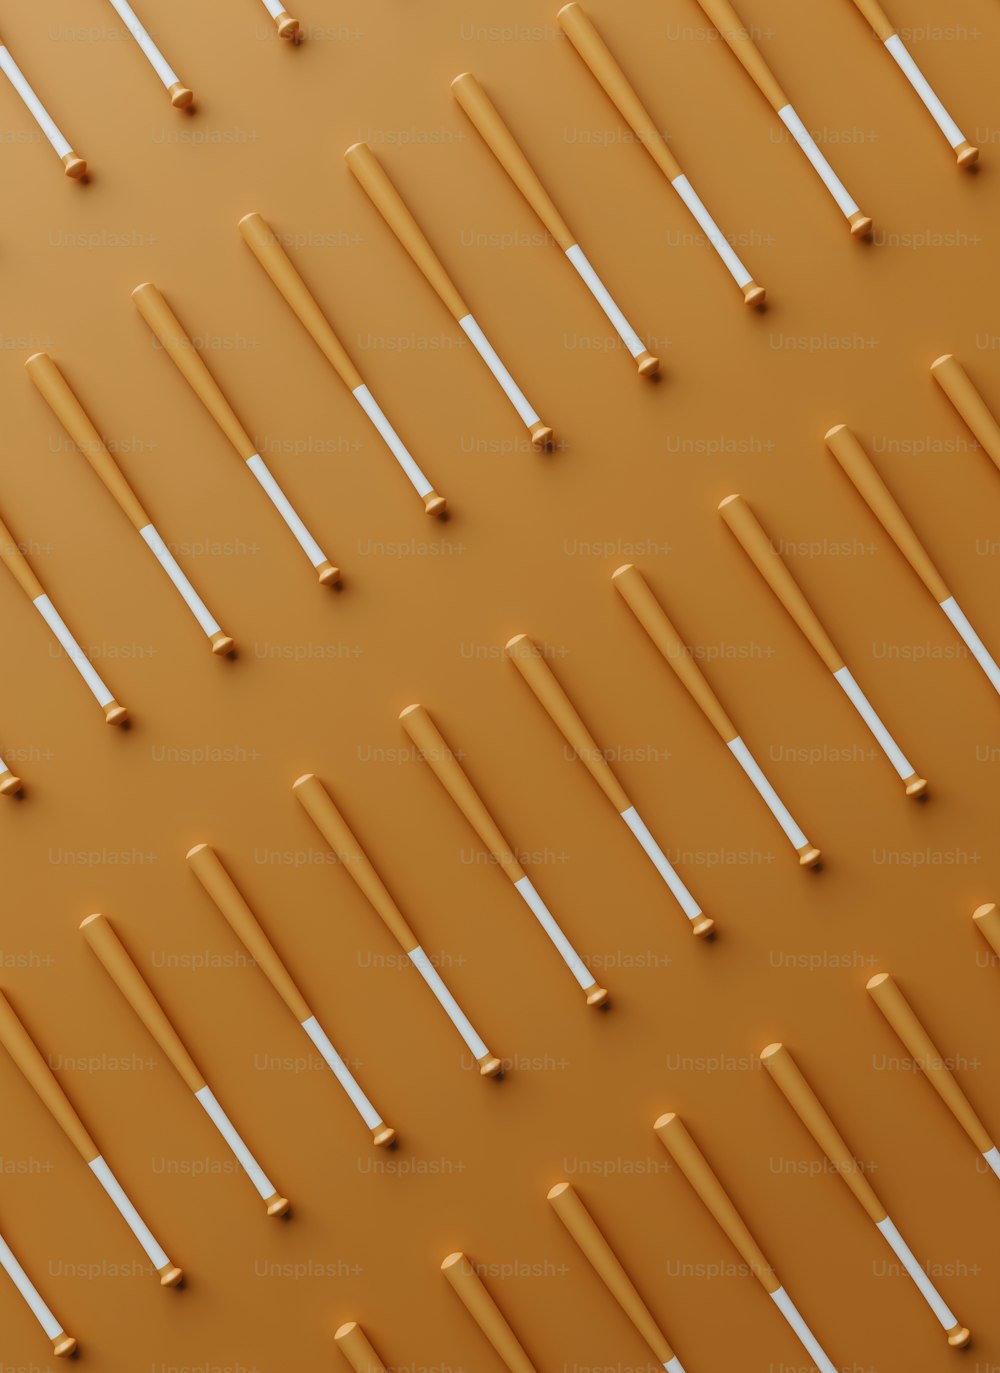 an orange background with a pattern of sticks